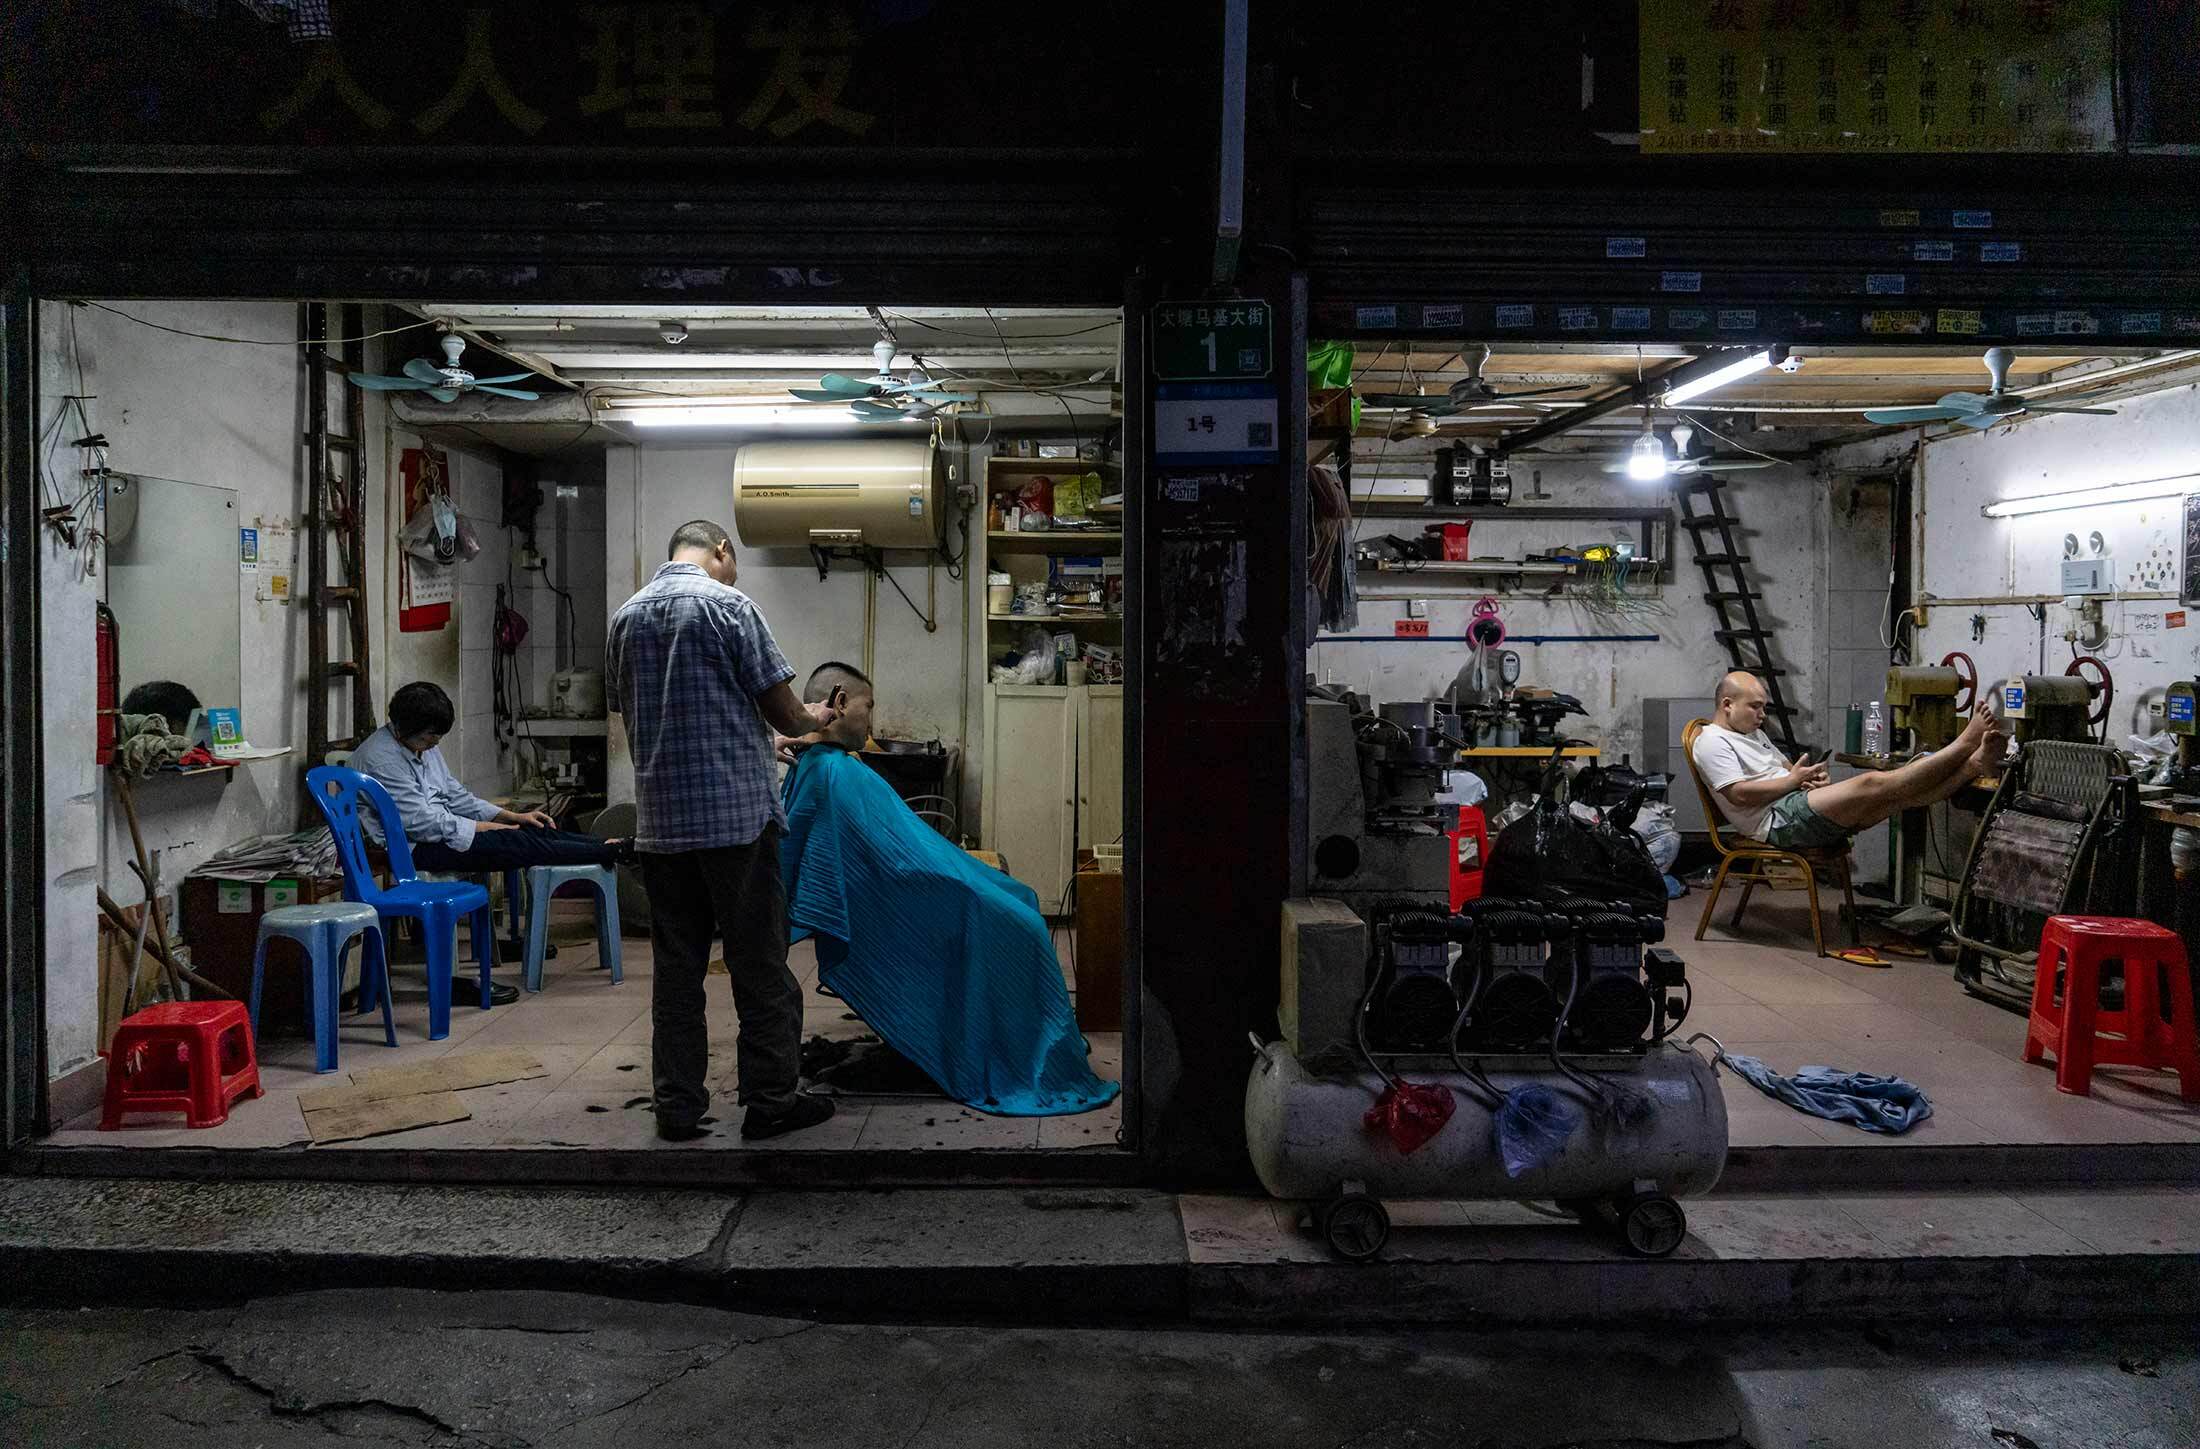 A barbershop&nbsp;in the Datang neighborhood of Guangzhou, the capital of China’s&nbsp;Guangdong province.